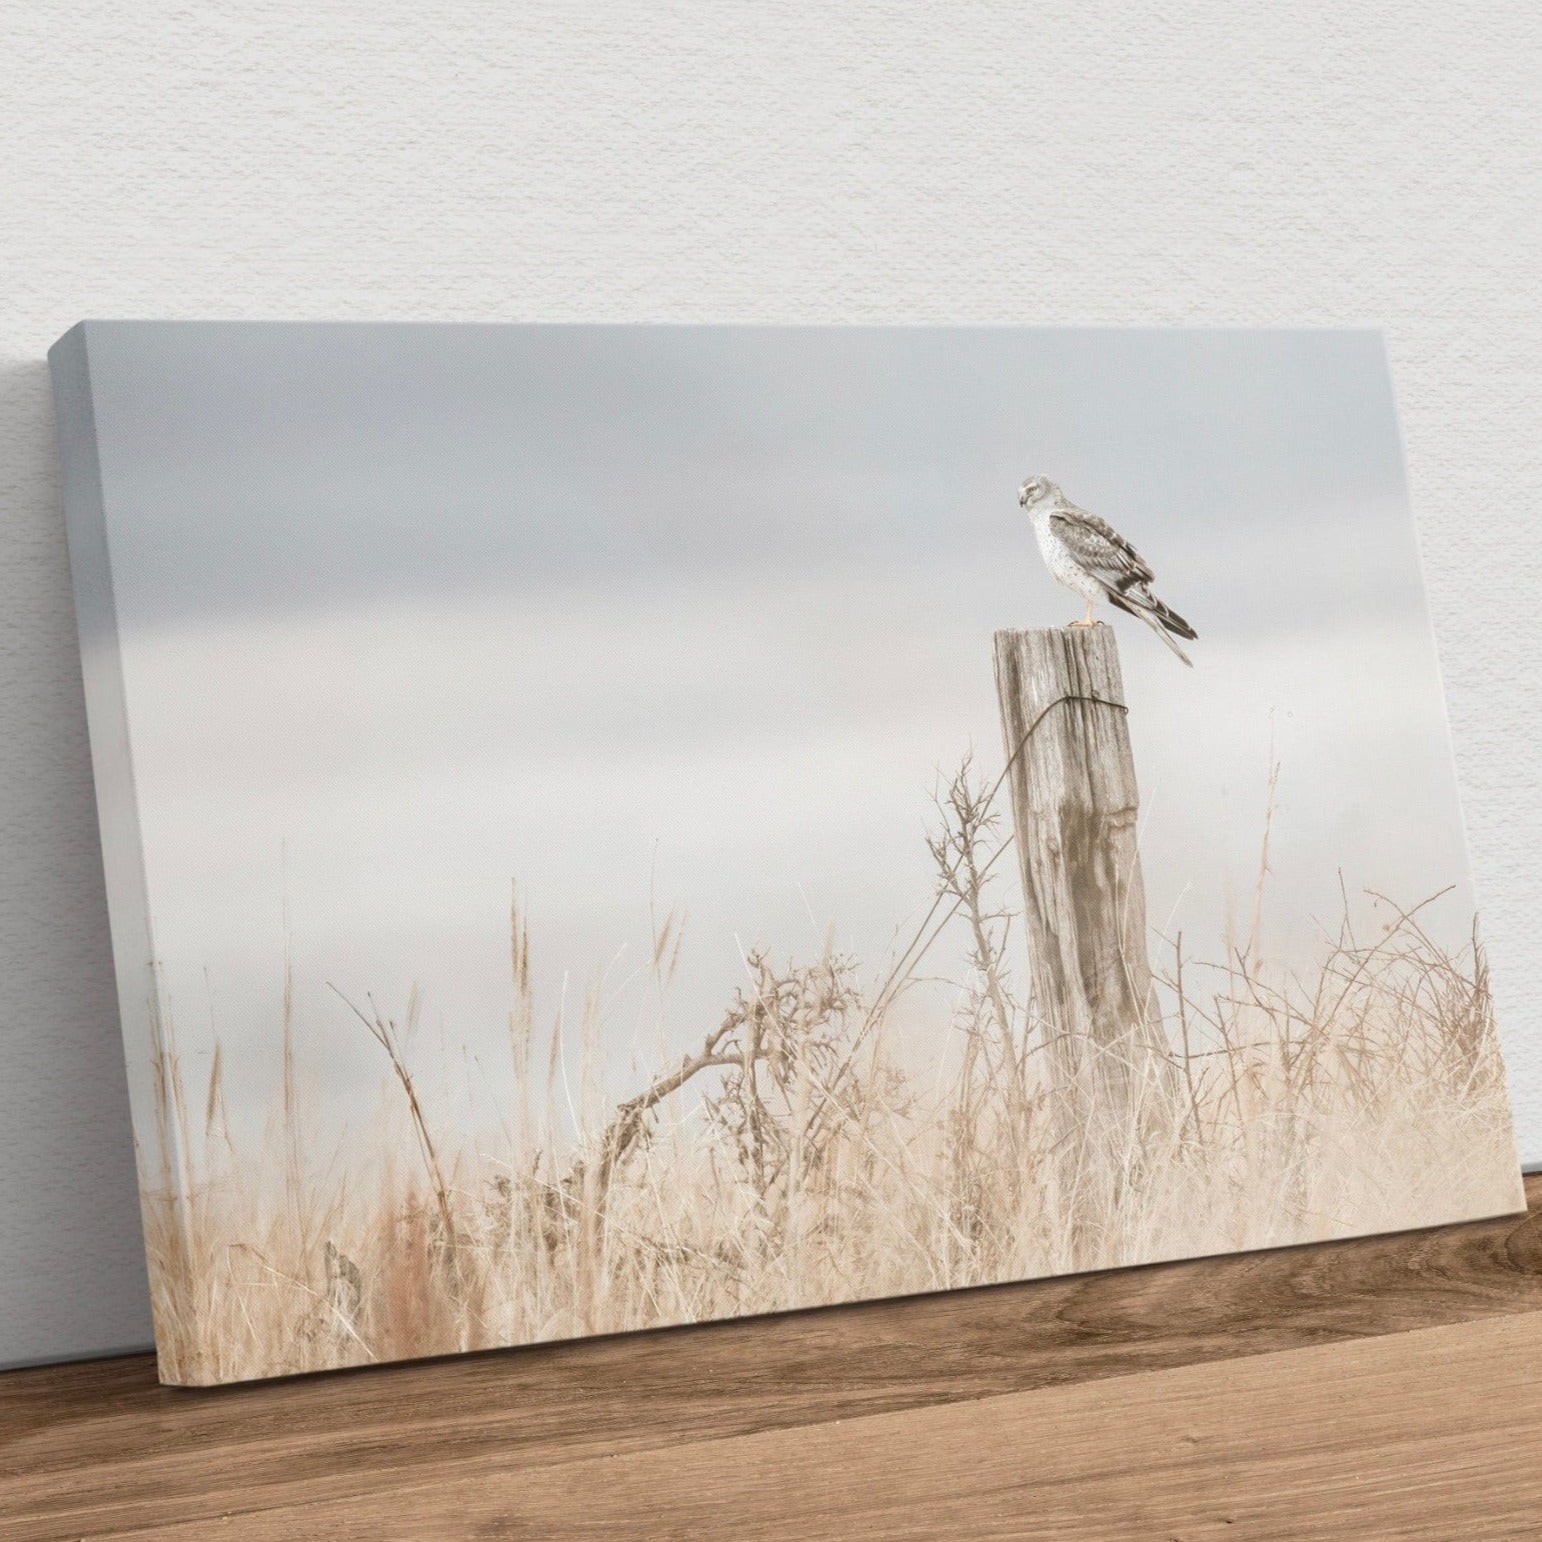 Northern Harrier Hawk on Fence Canvas-Unframed / 12 x 18 Inches Wall Art Teri James Photography